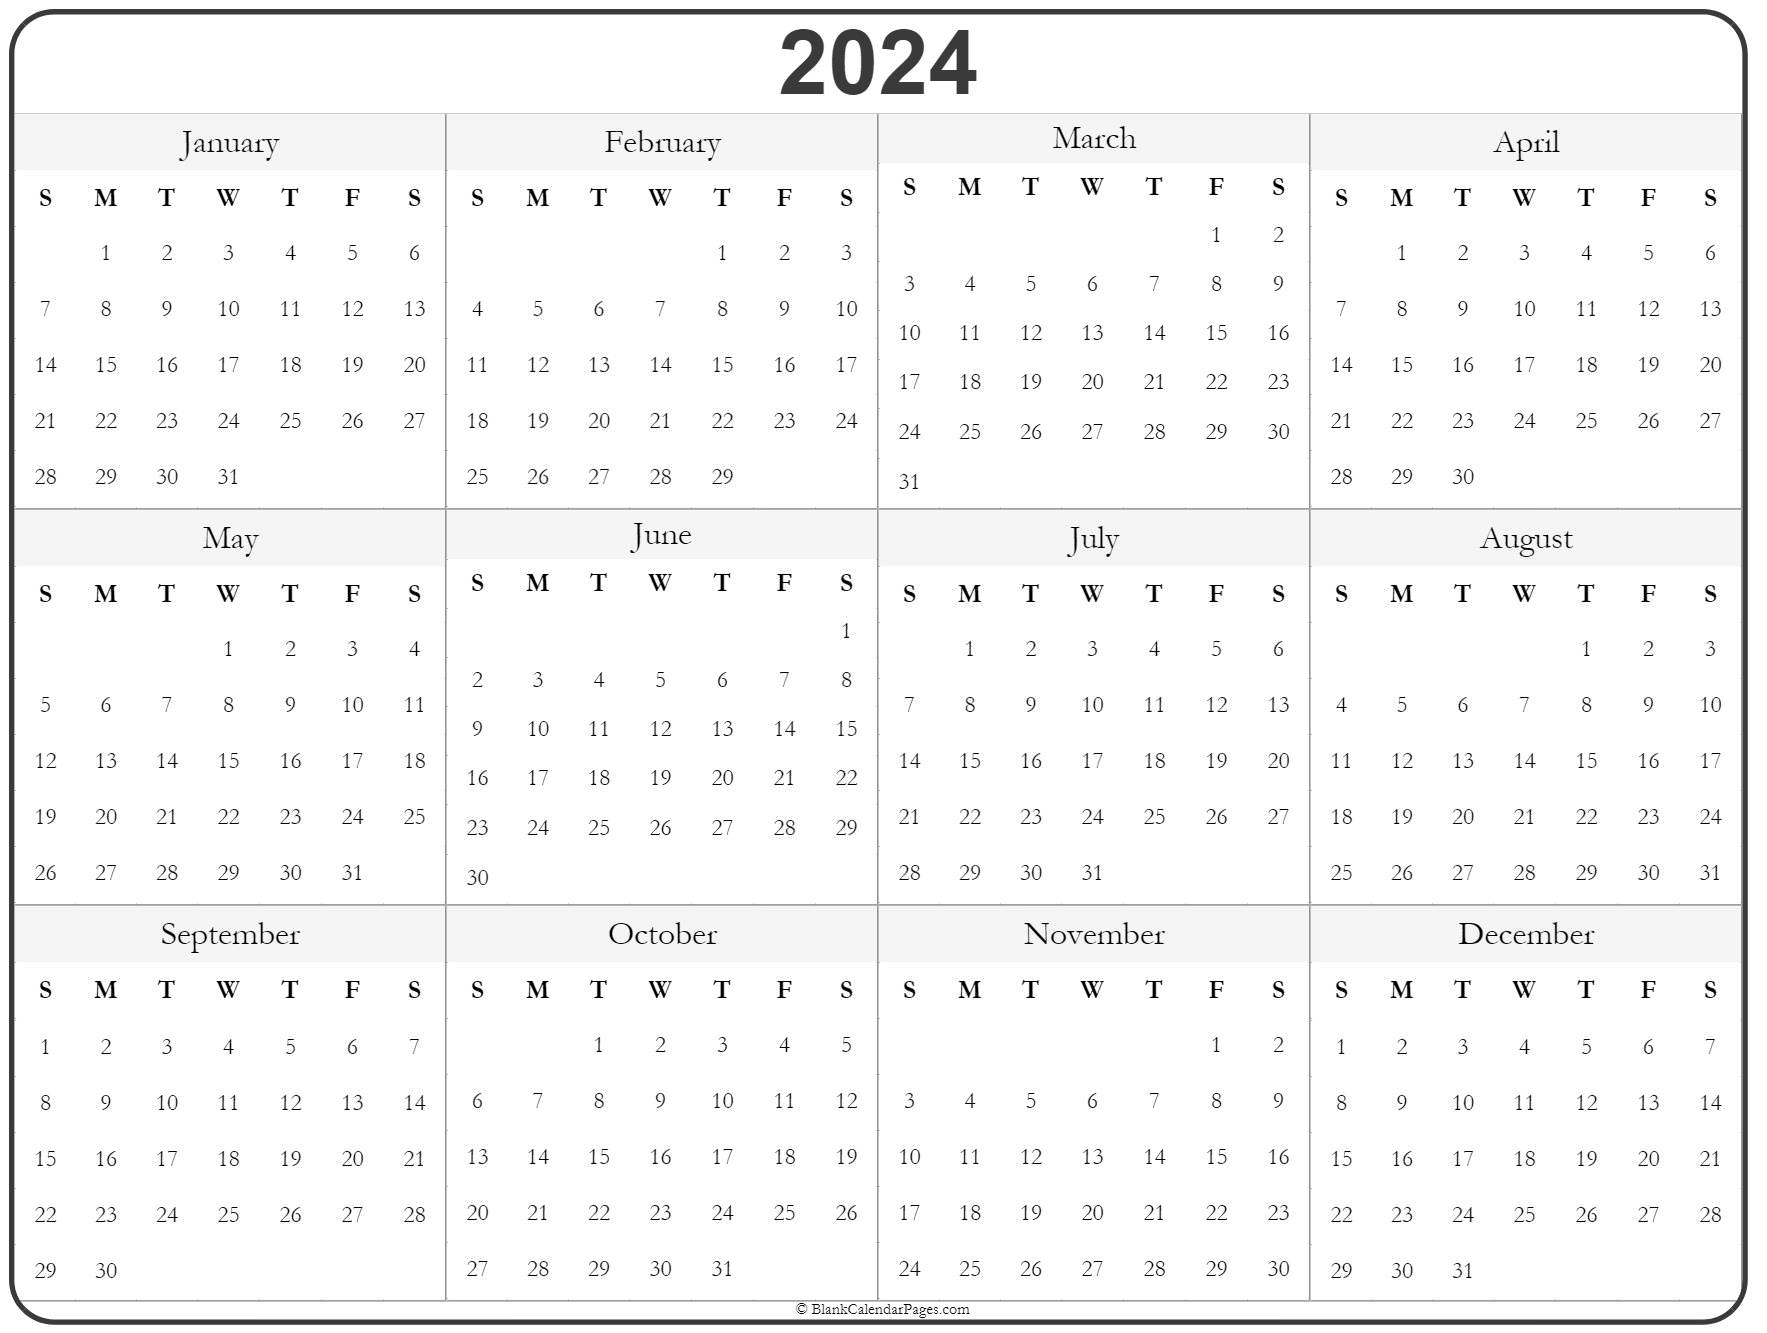 2024 Calendar Templates And Images 2024 Yearly Calendar In Excel Pdf - Free Printable Annual Calendar 2024